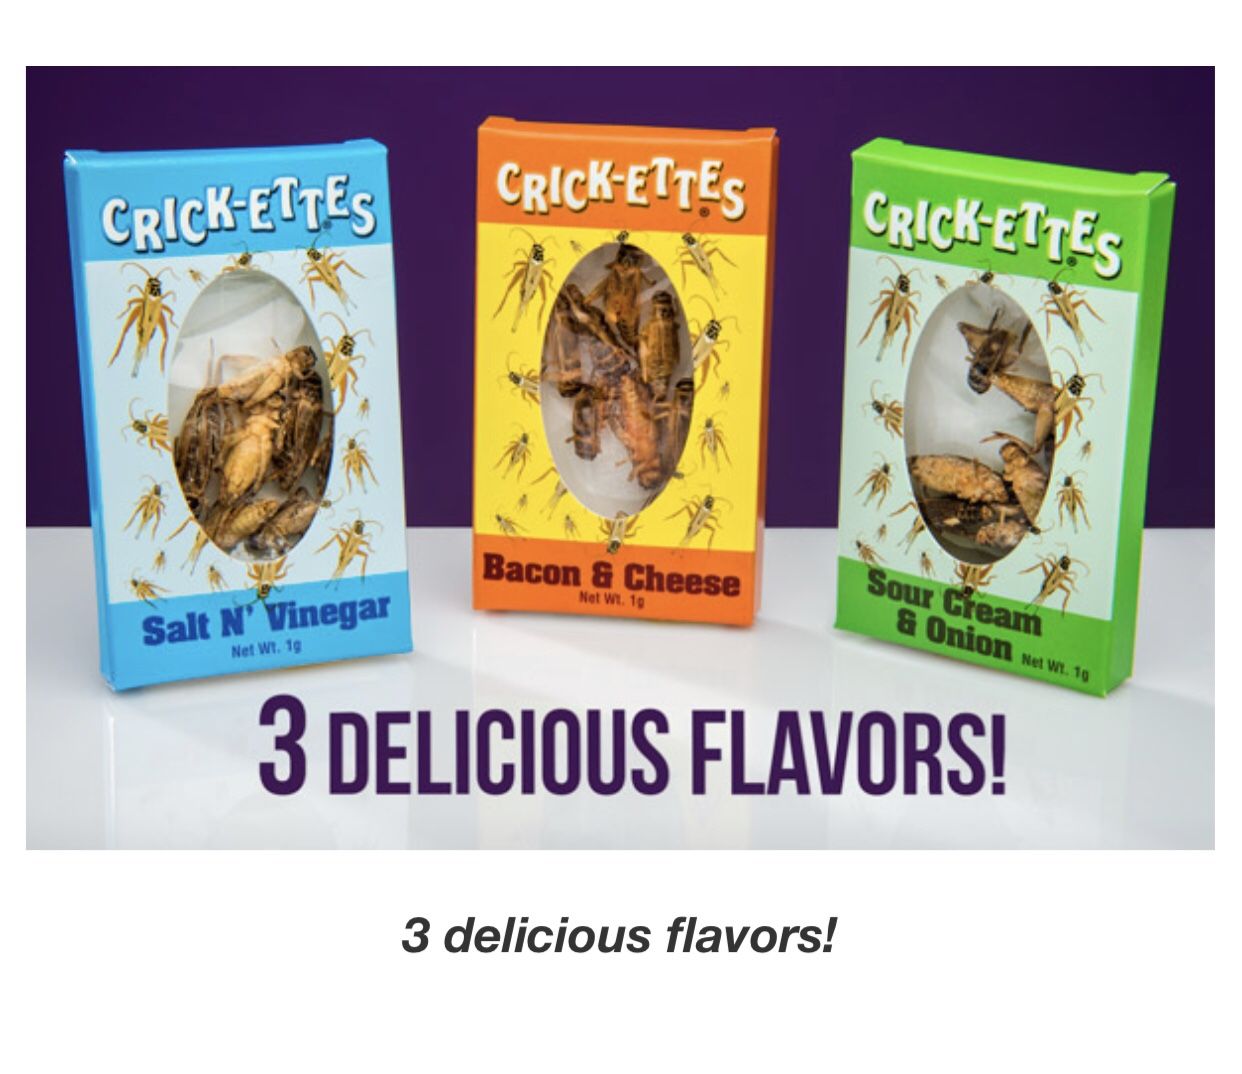 Seasoned Crickets, 3 Delicious Flavors! Bet You Can’t Just Eat One! Lol